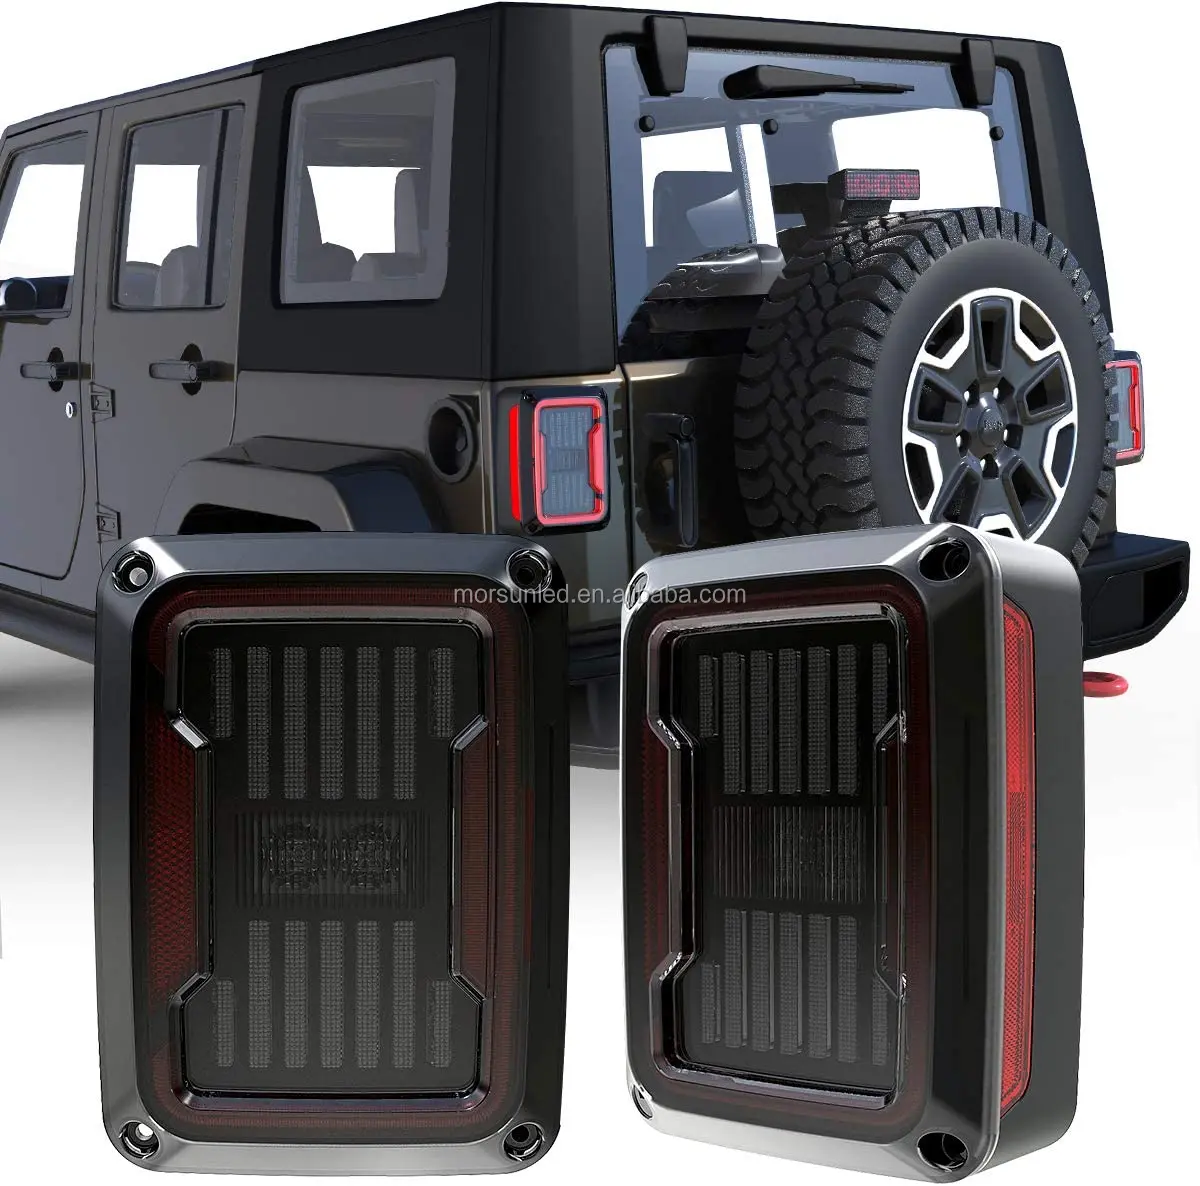 Rear Tail Lights For Jeep Wrangler Jk 2007-2017 Parts Led Tail Lamp Smoked  / Clear Color For Jeep Direct Fitment - Buy Rear Tail Lights For Jeep  Wrangler Jk 2007-2017 Parts,Led Tail